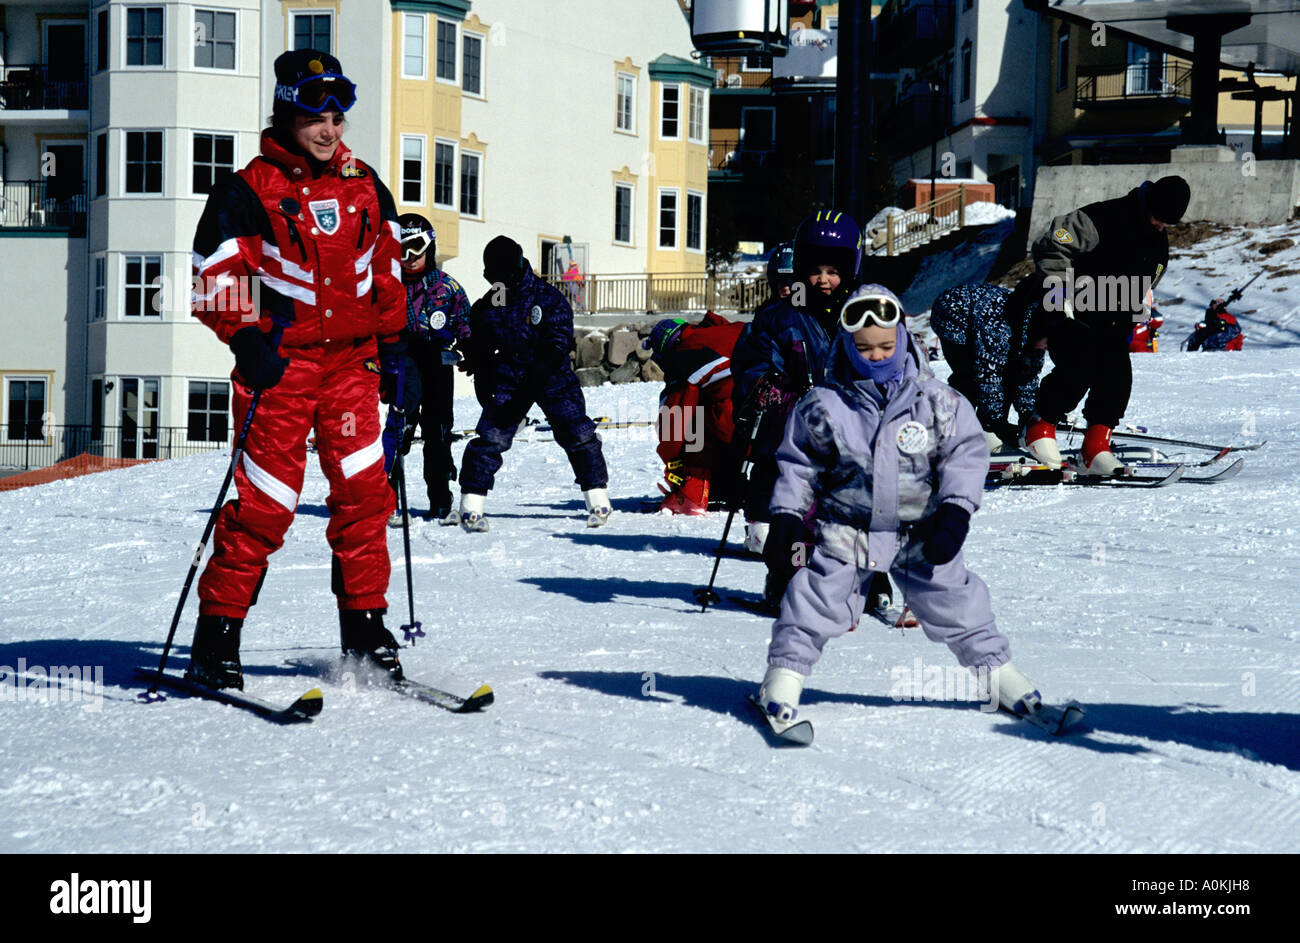 Young children learn to ski at the Mont Tremblant ski resort in Quebec Canada Stock Photo